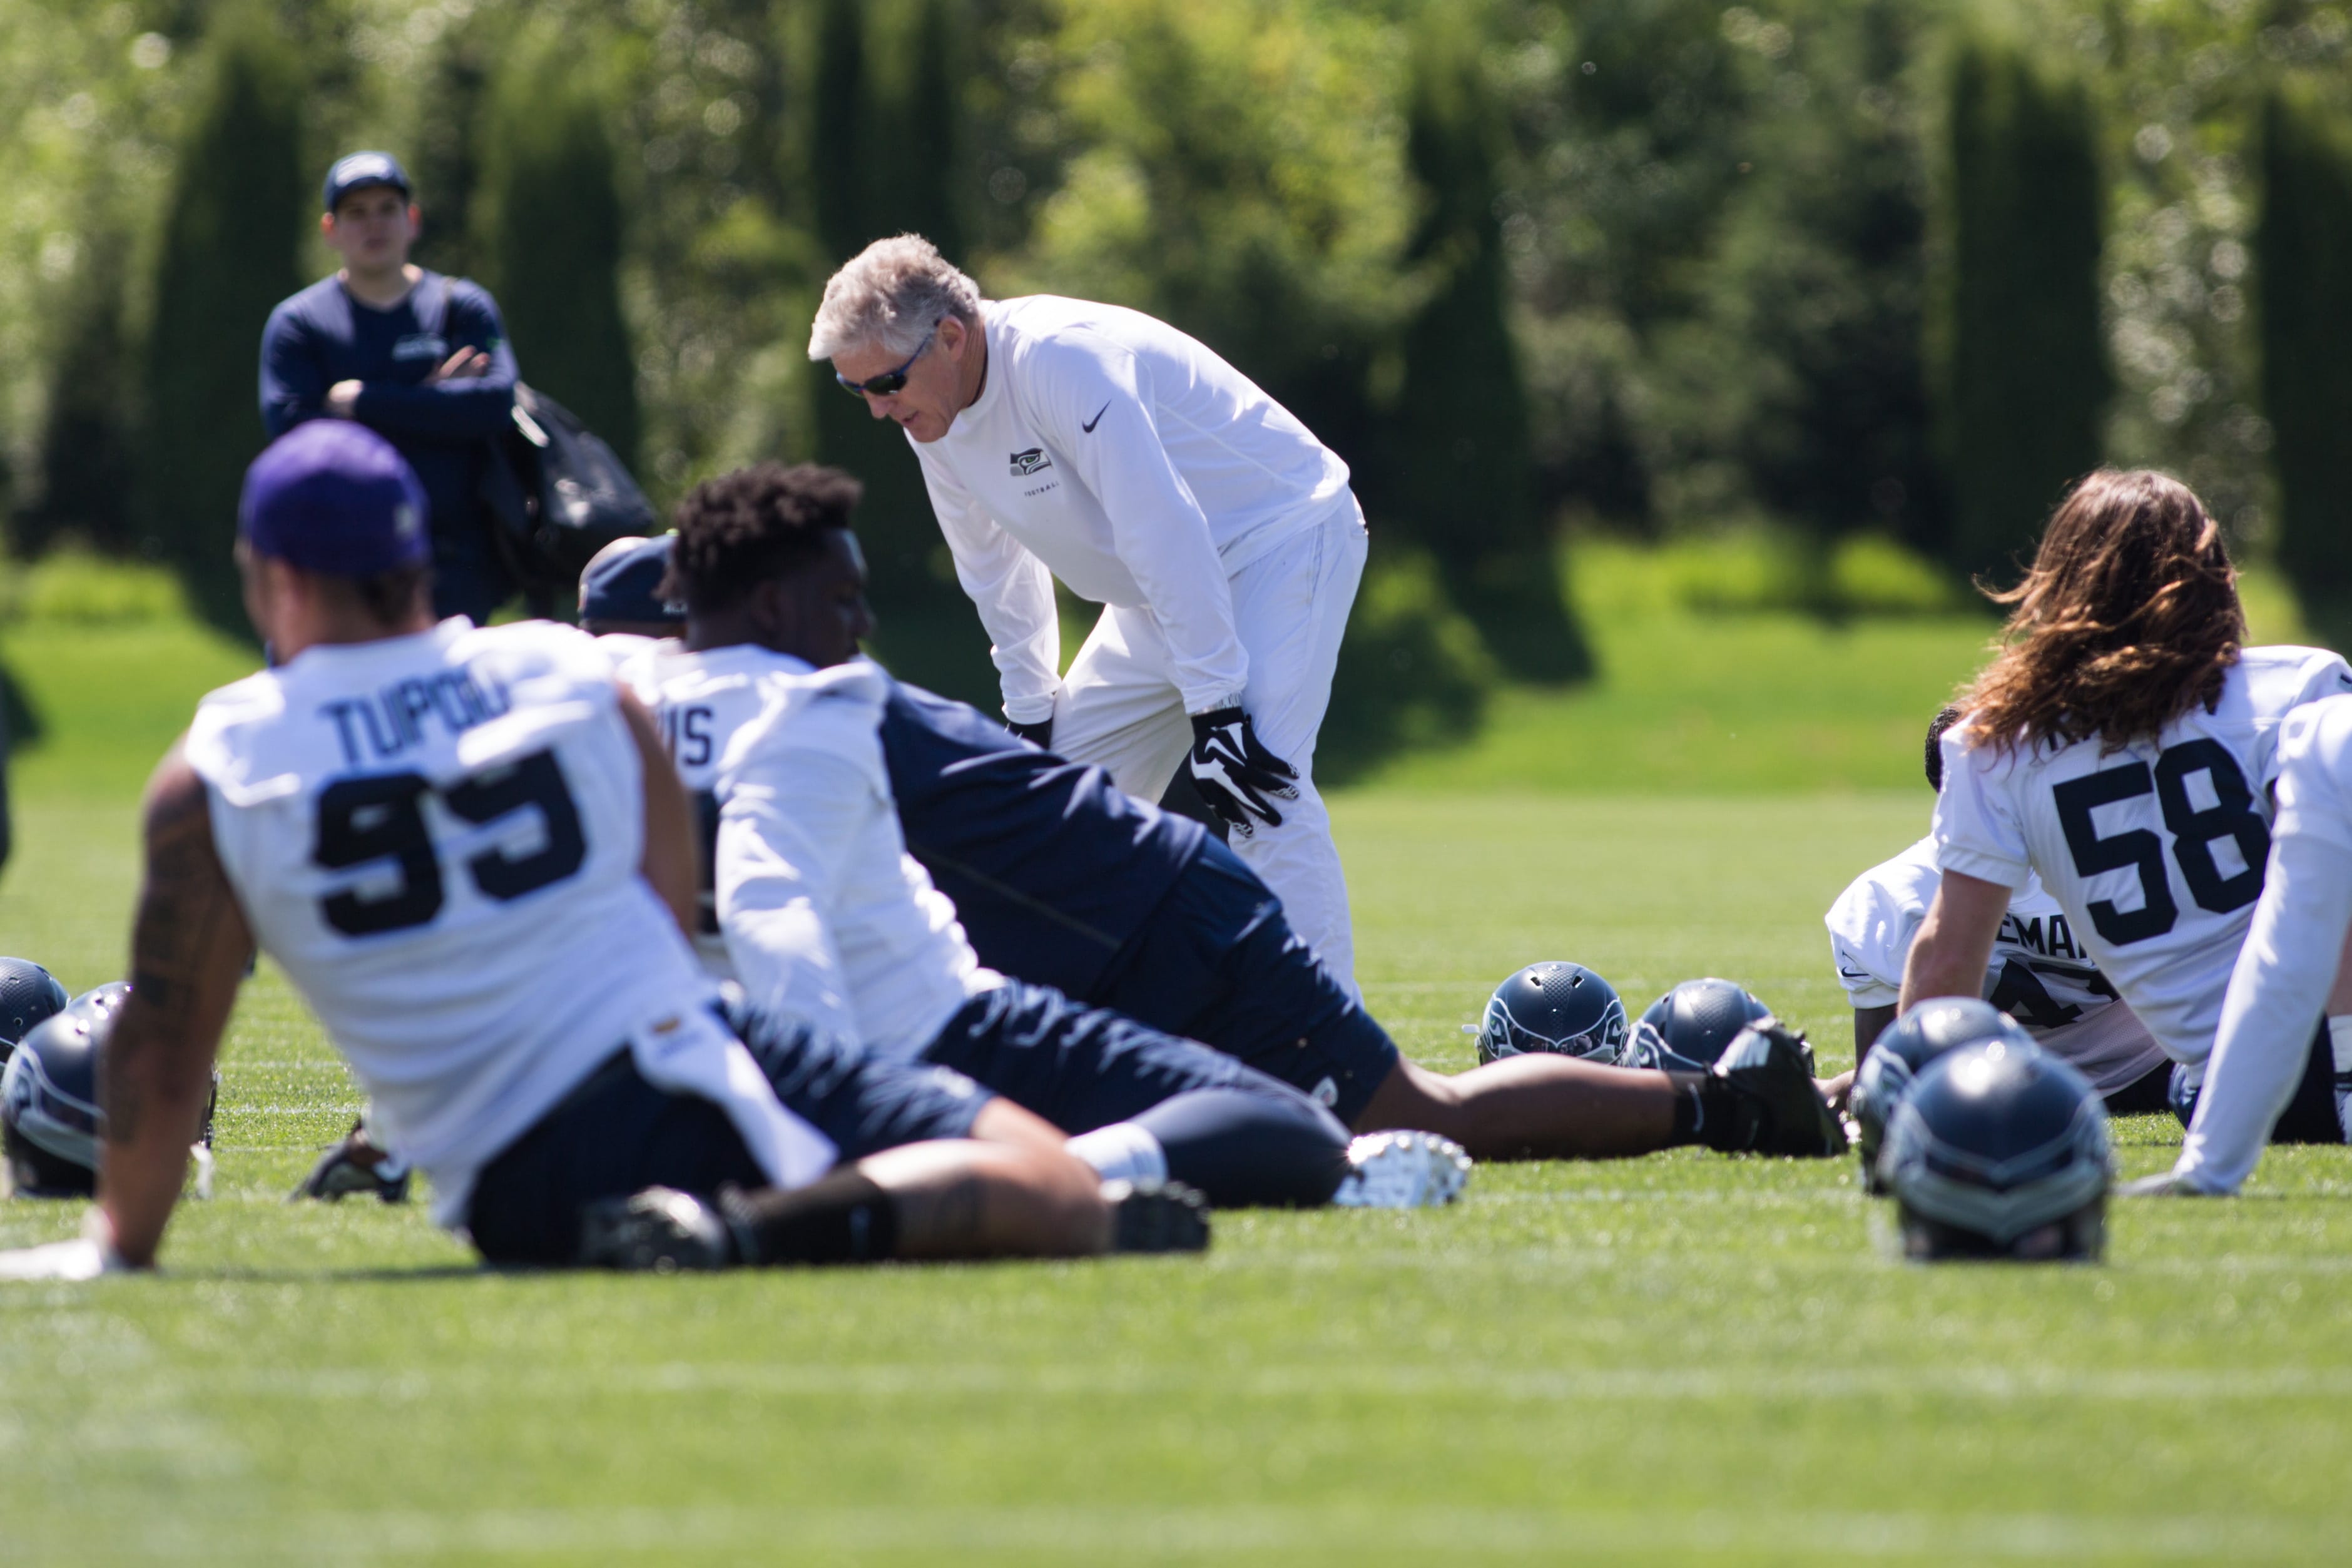 Head coach Pete Carroll talks to players as they stretch during the first day of the Seattle Seahawks NFL football rookie minicamp on Friday, May 6, 2016 at Virginia Mason Athletic Center in Renton, Wash.